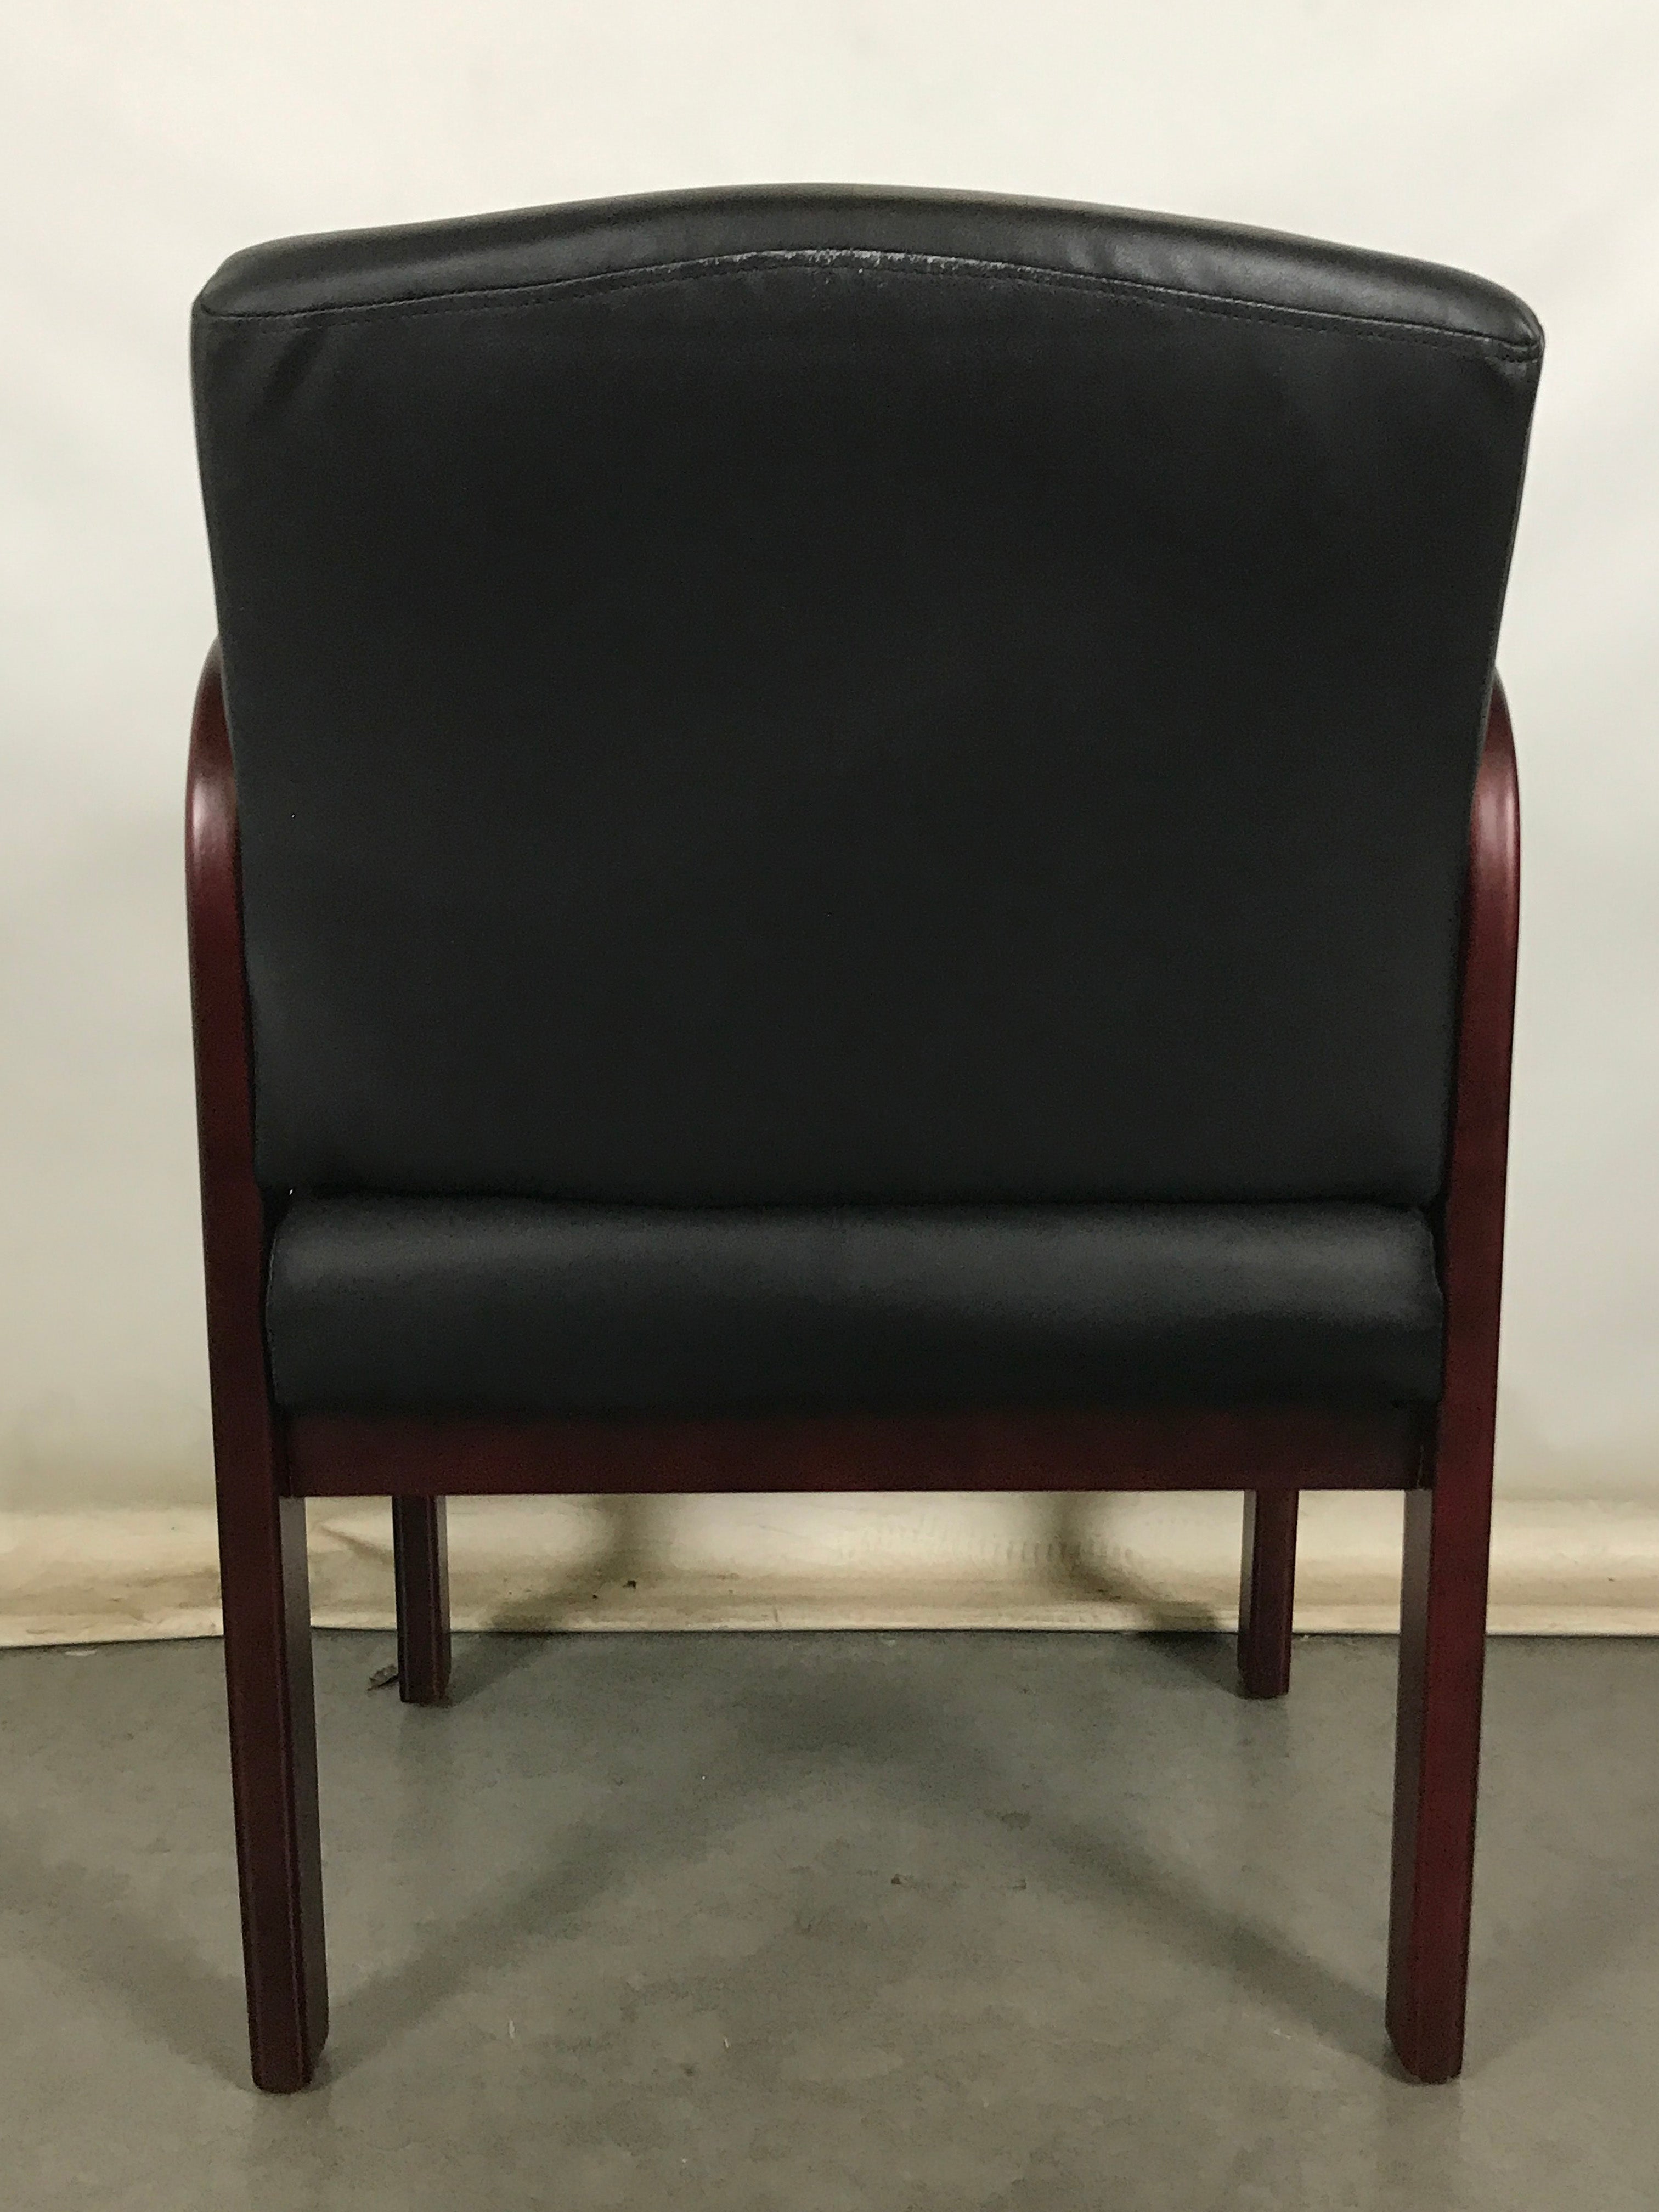 Black Chair with Cherry Colored Wooden Frame